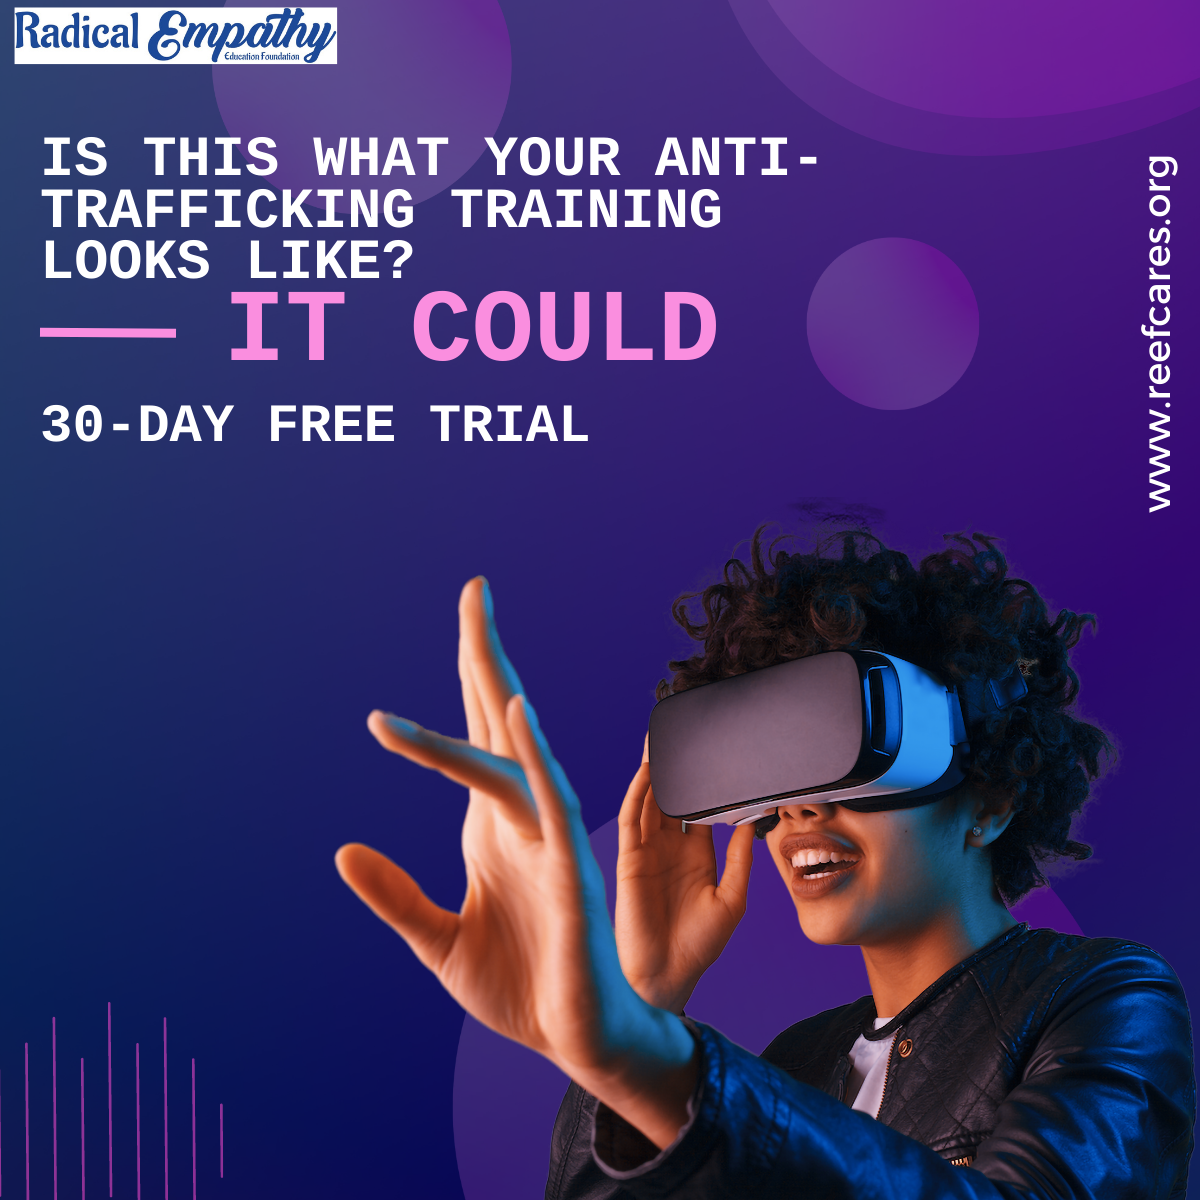 "Is this what your anti trafficking training looks like?" campaign advertisement